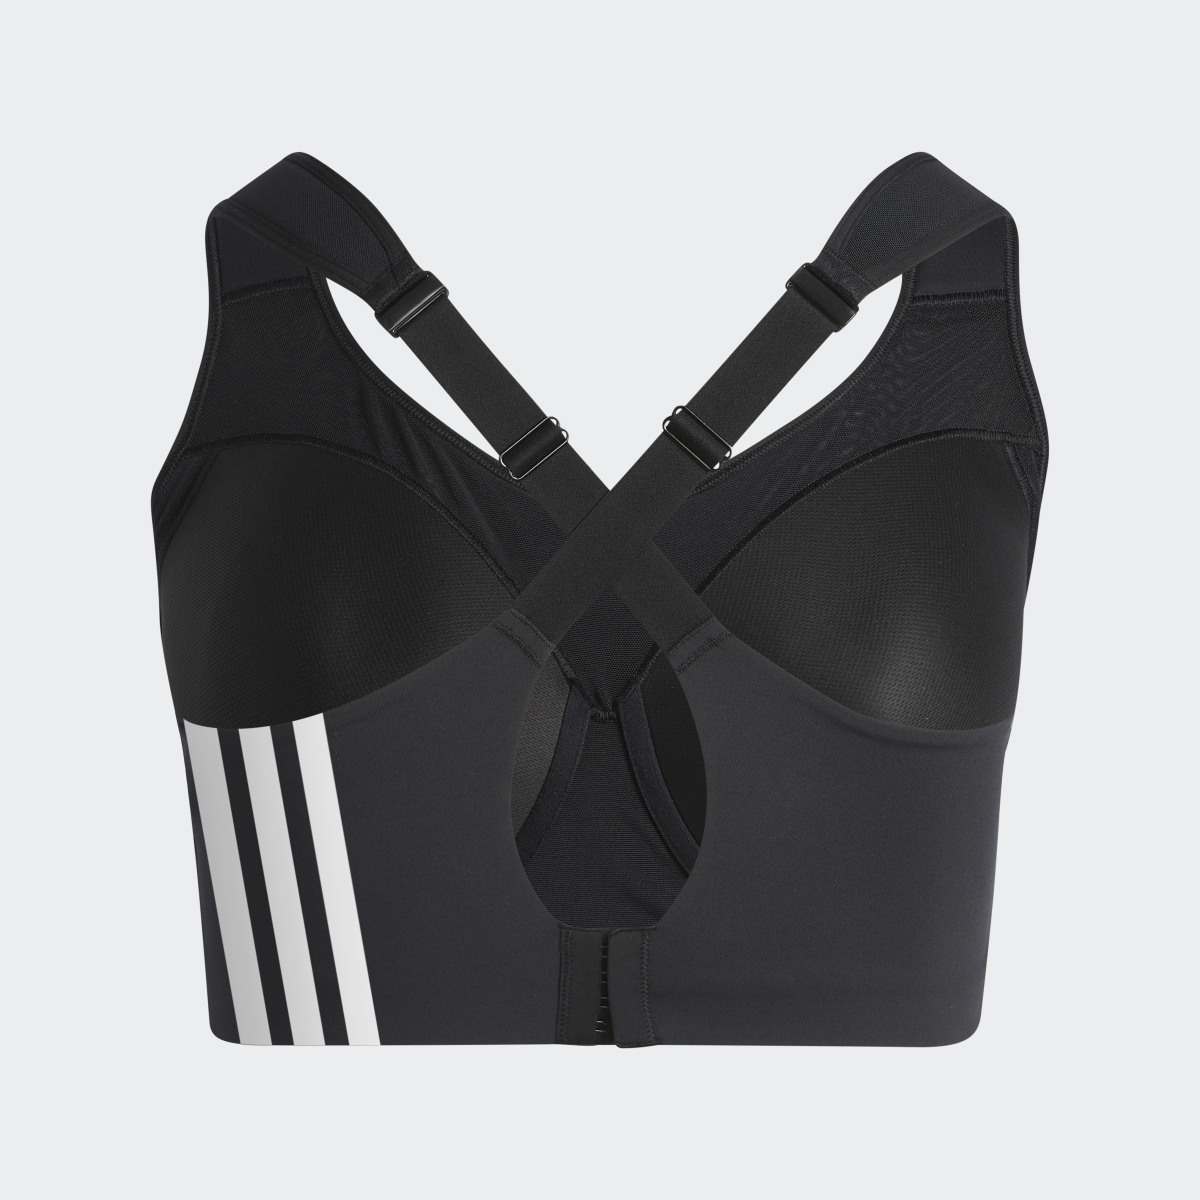 Adidas Brassière de training Maintien fort adidas TLRD Impact (Grandes tailles). 6